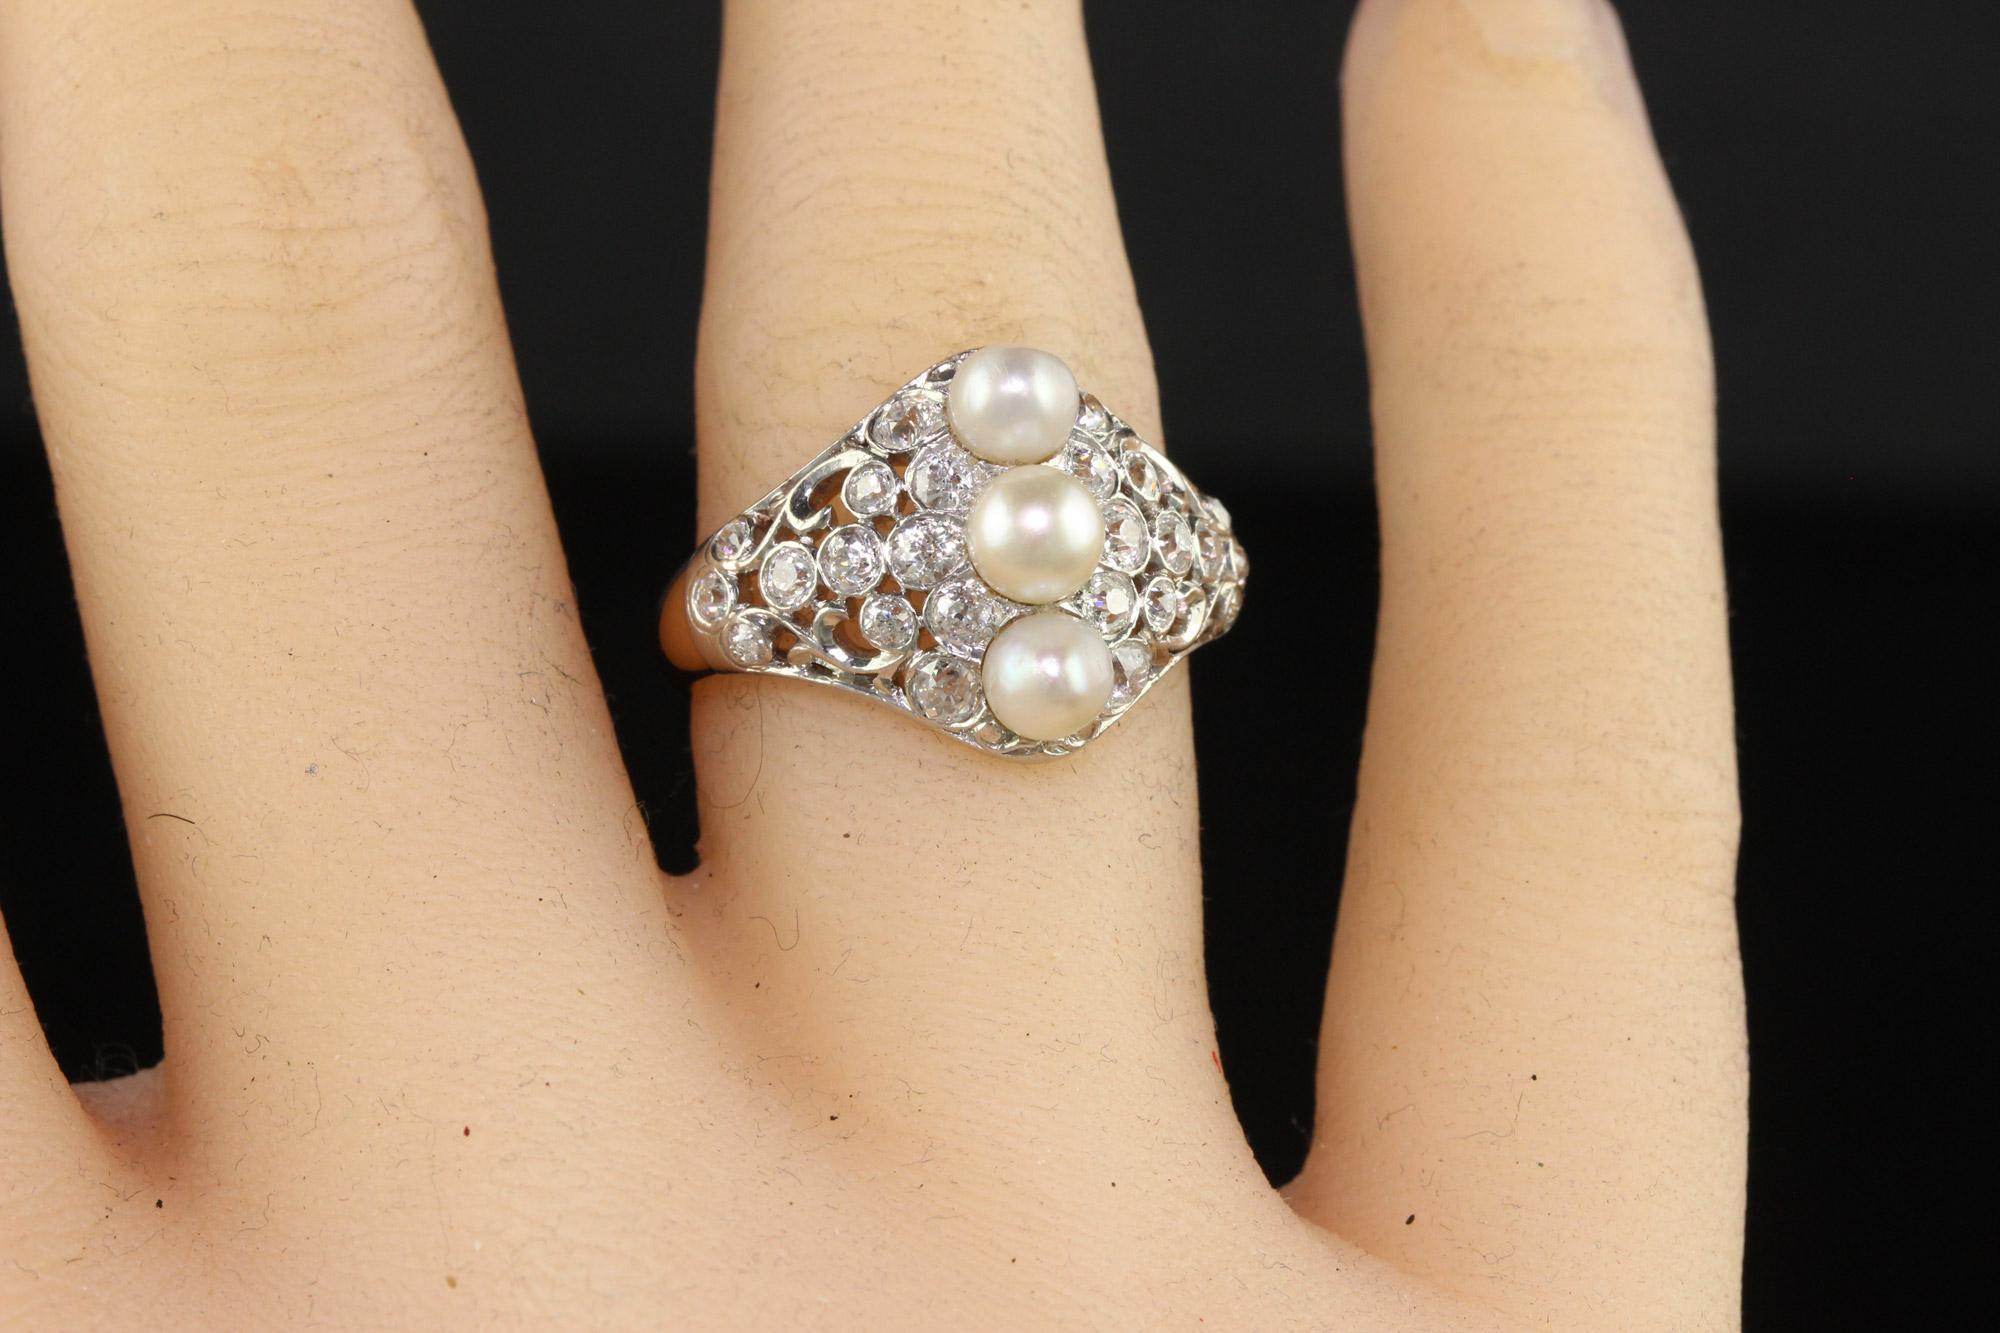 Antique Edwardian Spaulding and Co 18K Gold Platinum Old Euro Diamond Pearl Ring For Sale 3